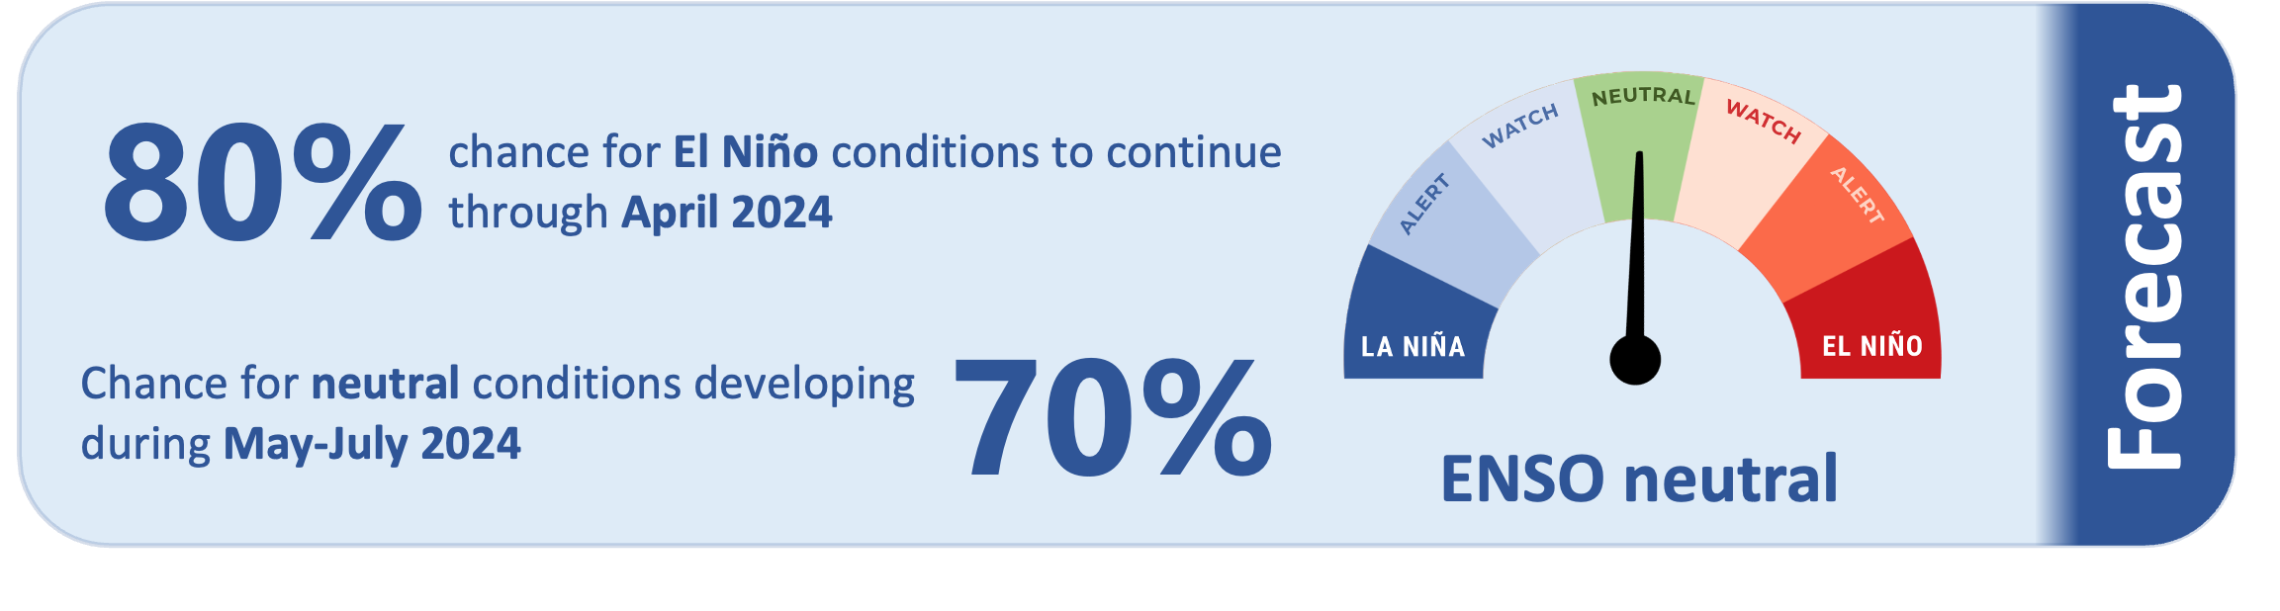 El Niño forecast infographic - El Niño continued during February and has around an 80% chance of persisting through April. However, ENSO neutral conditions are favoured to develop during May-July 2024.